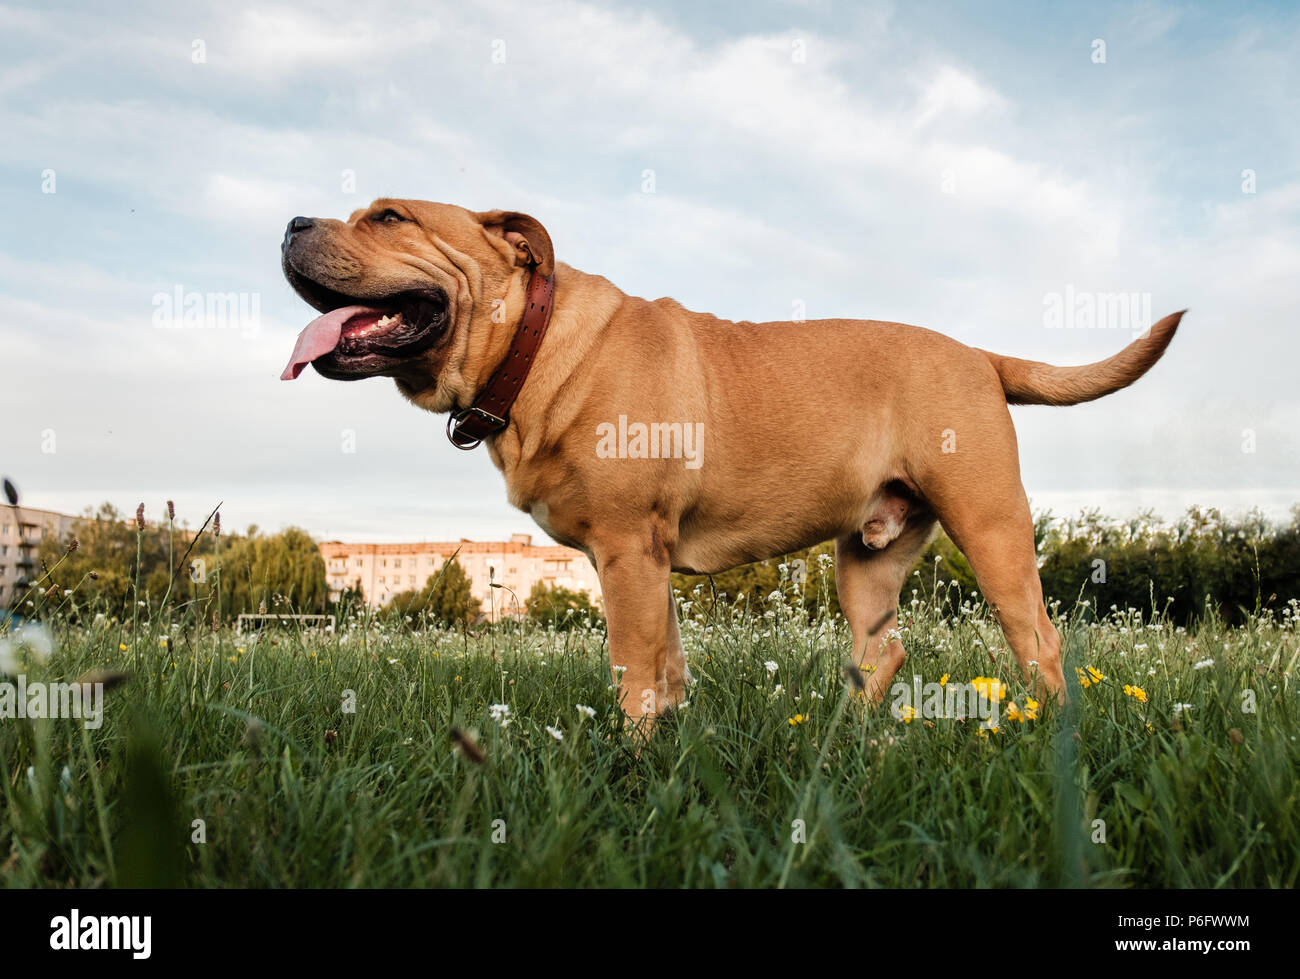 A brown dog corso corso stands in a field on a green grass Stock Photo